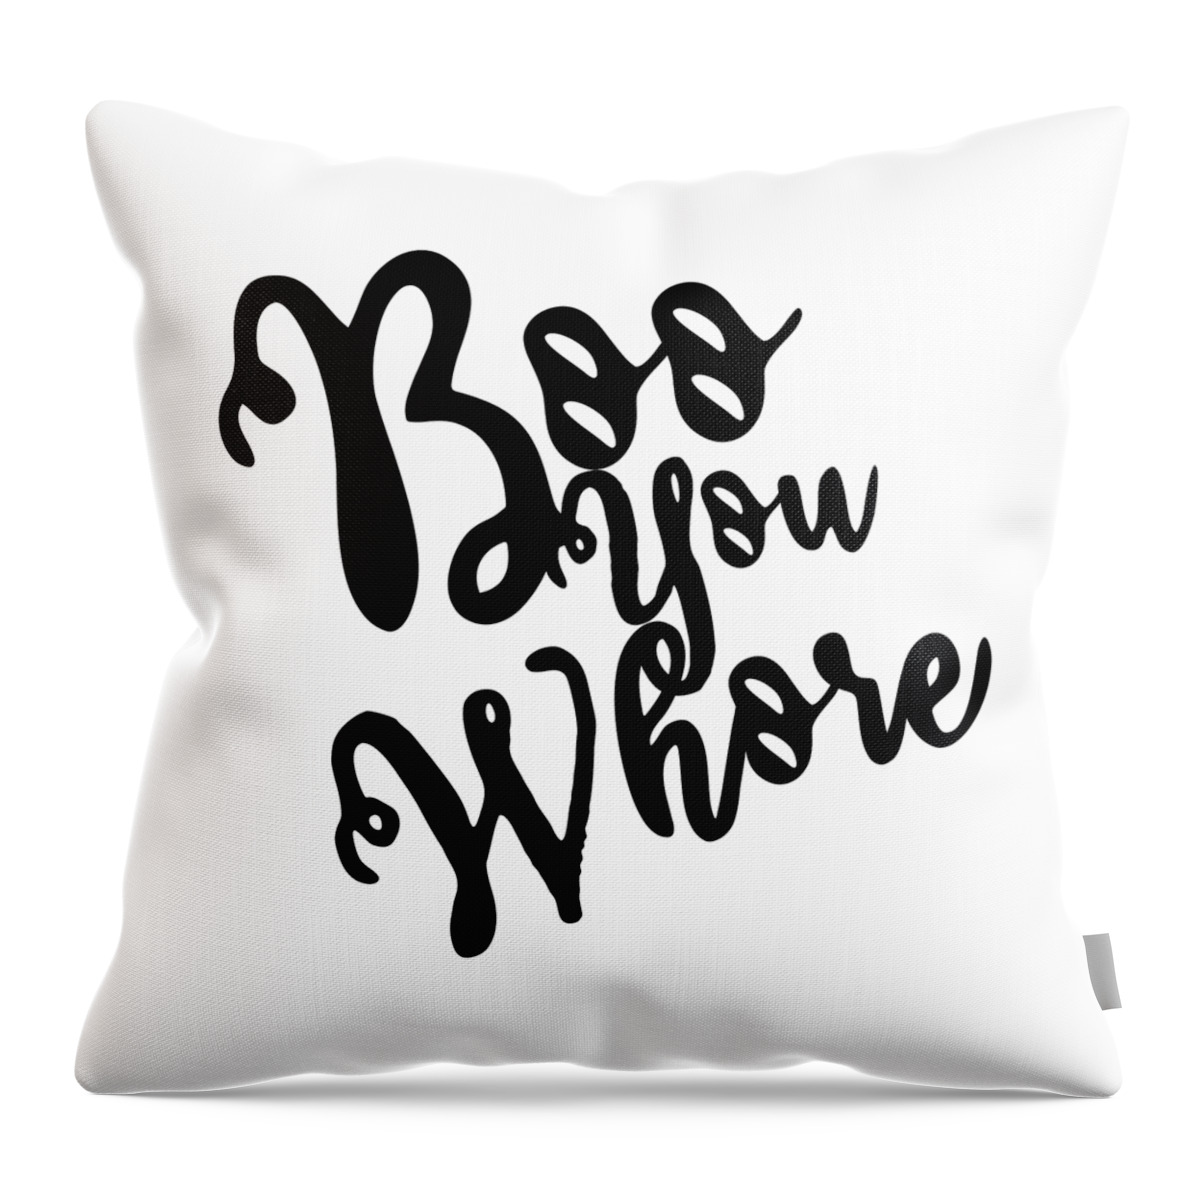 Cool Throw Pillow featuring the digital art Boo You Whore by Flippin Sweet Gear